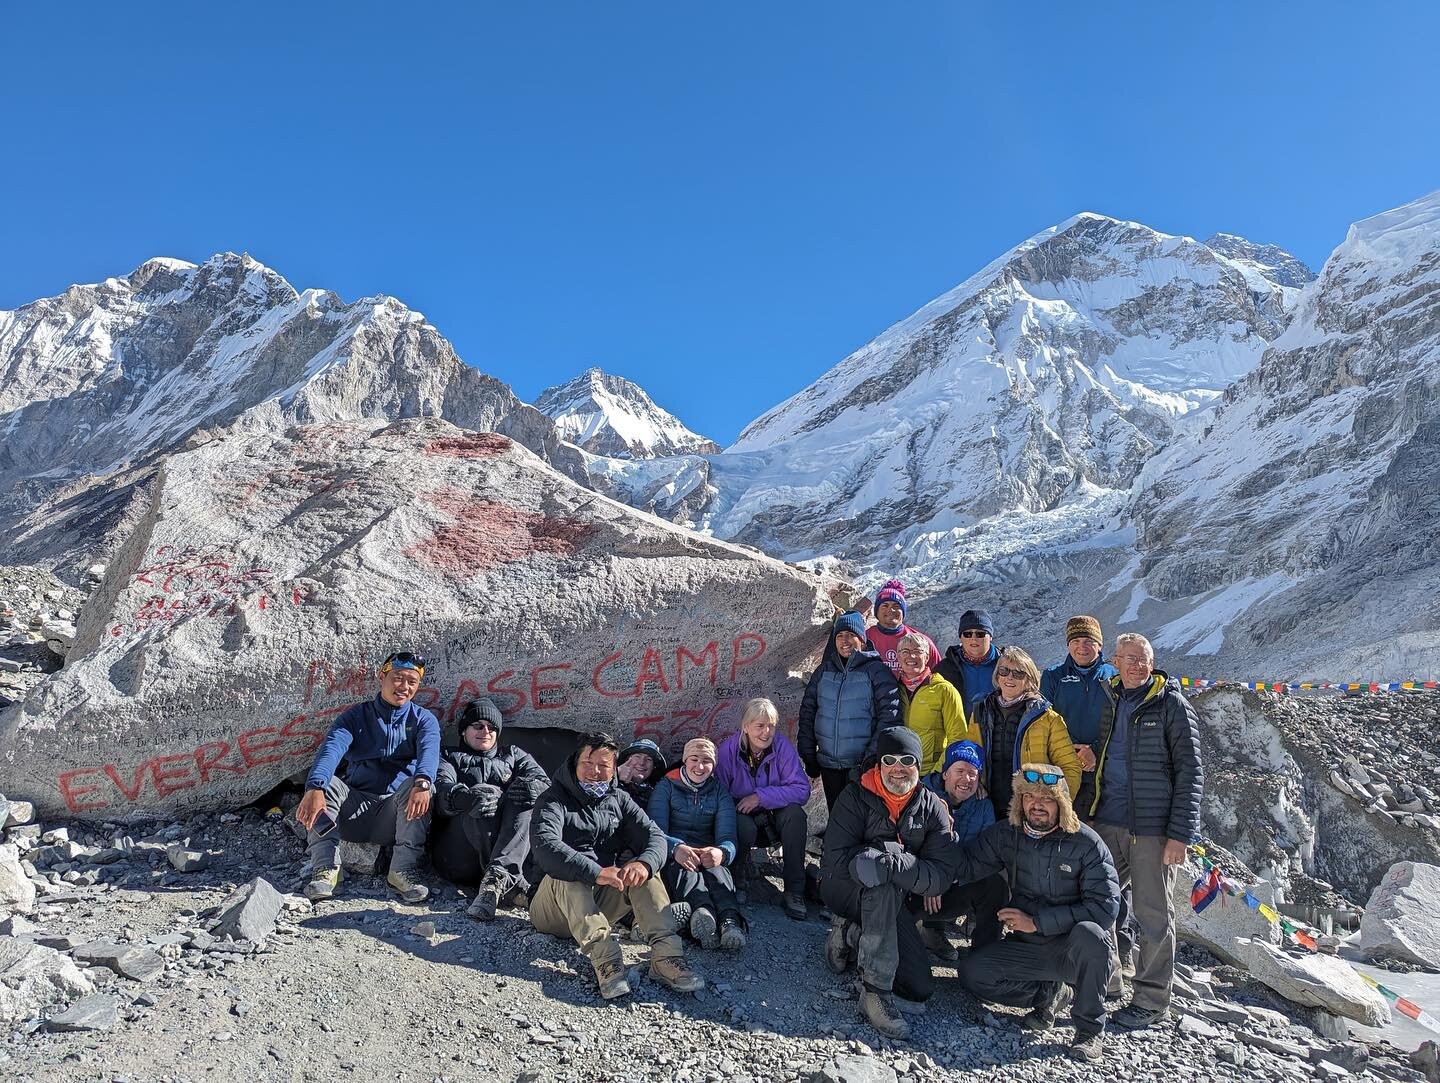 Congratulations to team @venture_force 2023 on reaching #everestbasecamp earlier today. 

Not only a huge all round team achievement but some massive personal challenges for everyone involved 👏👏

A very humbling, satisfying and unexpected experienc